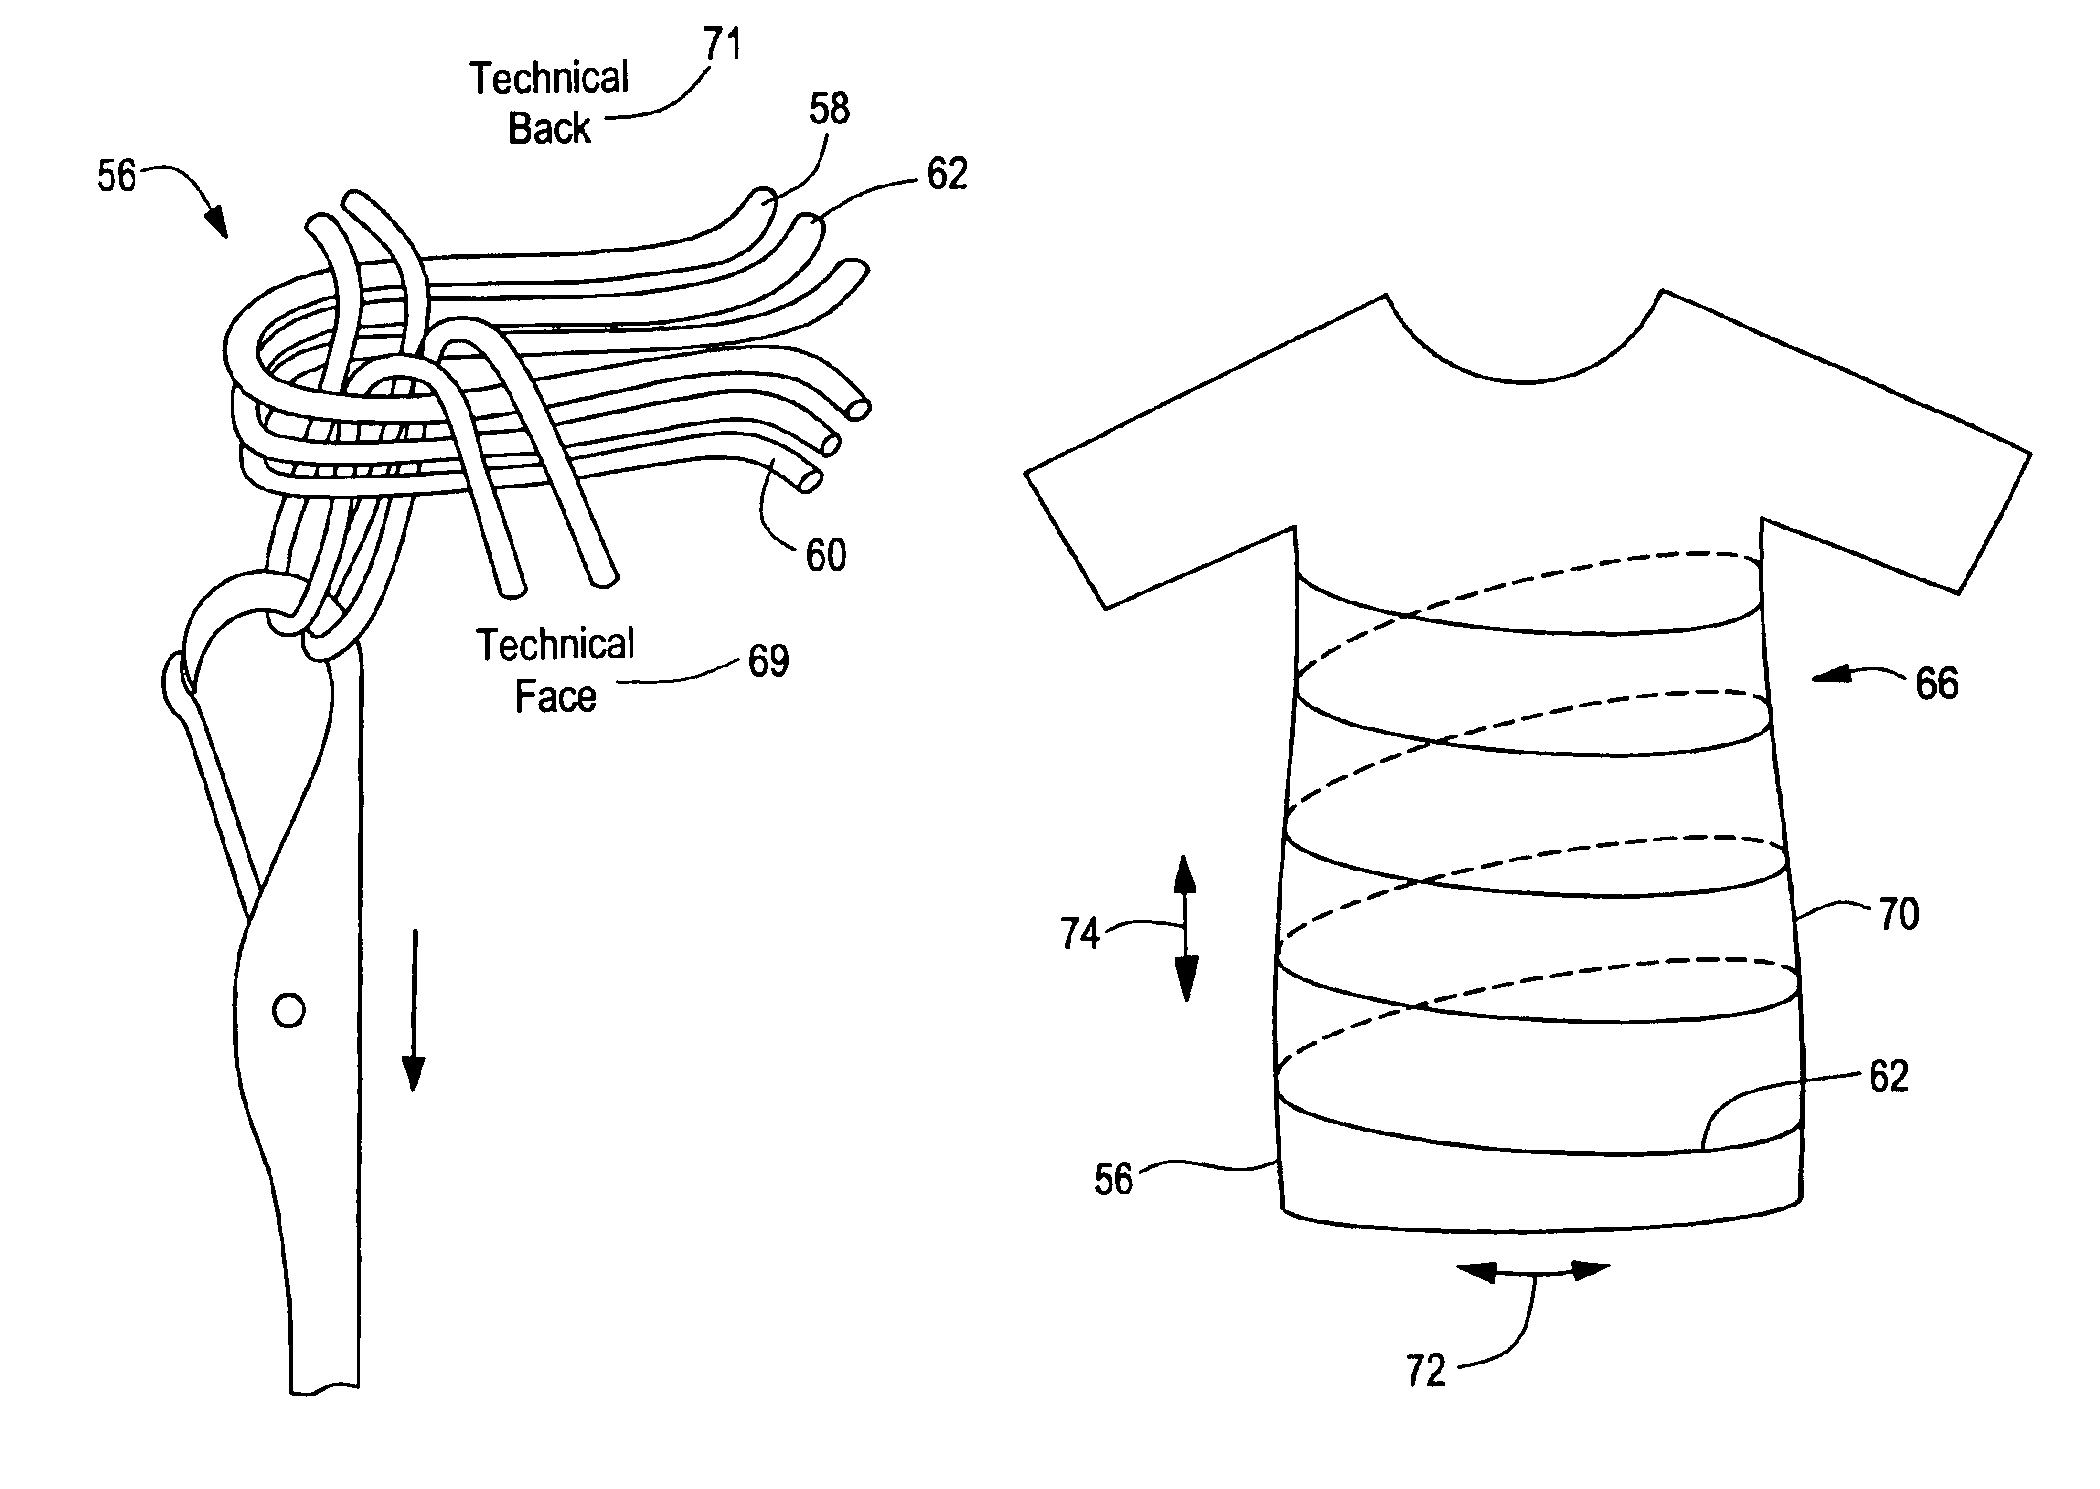 Tubular knit fabric and system